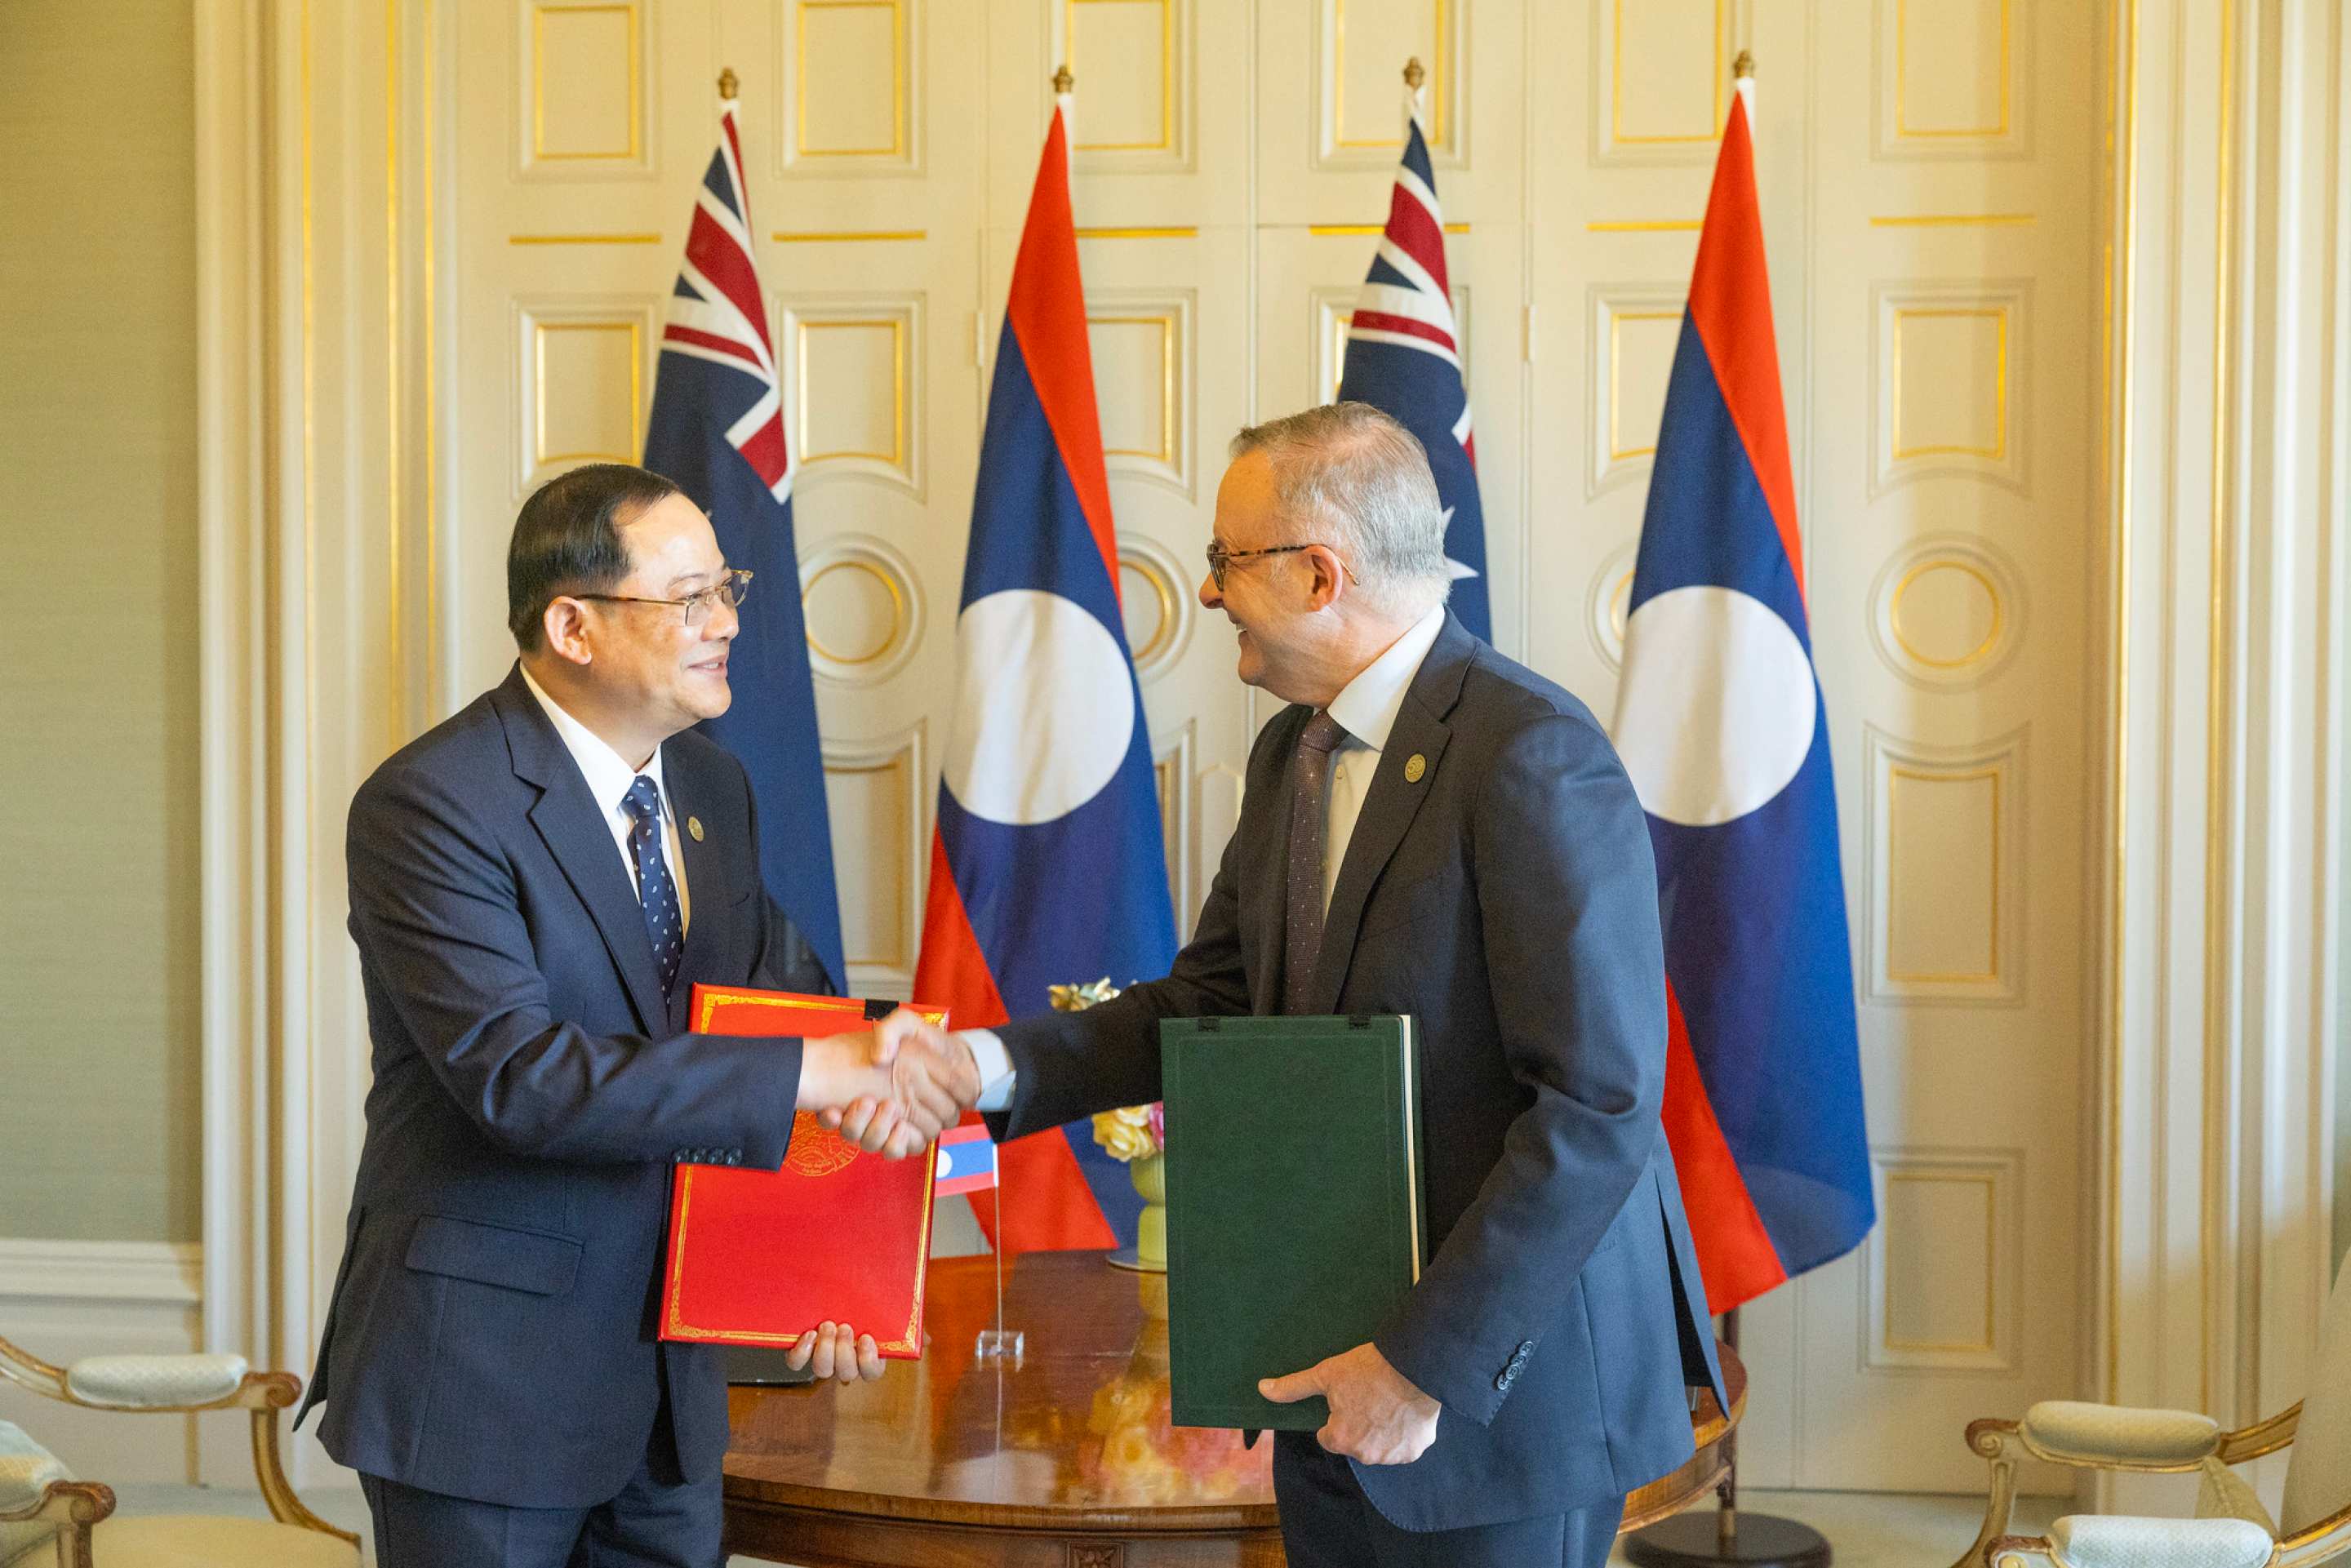 Prime Minister of Laos and Prime Minister of Australia shaking hands after signing an Australia-Laos Comprehensive Partnership at the ASEAN-Australia Special Summit 2024